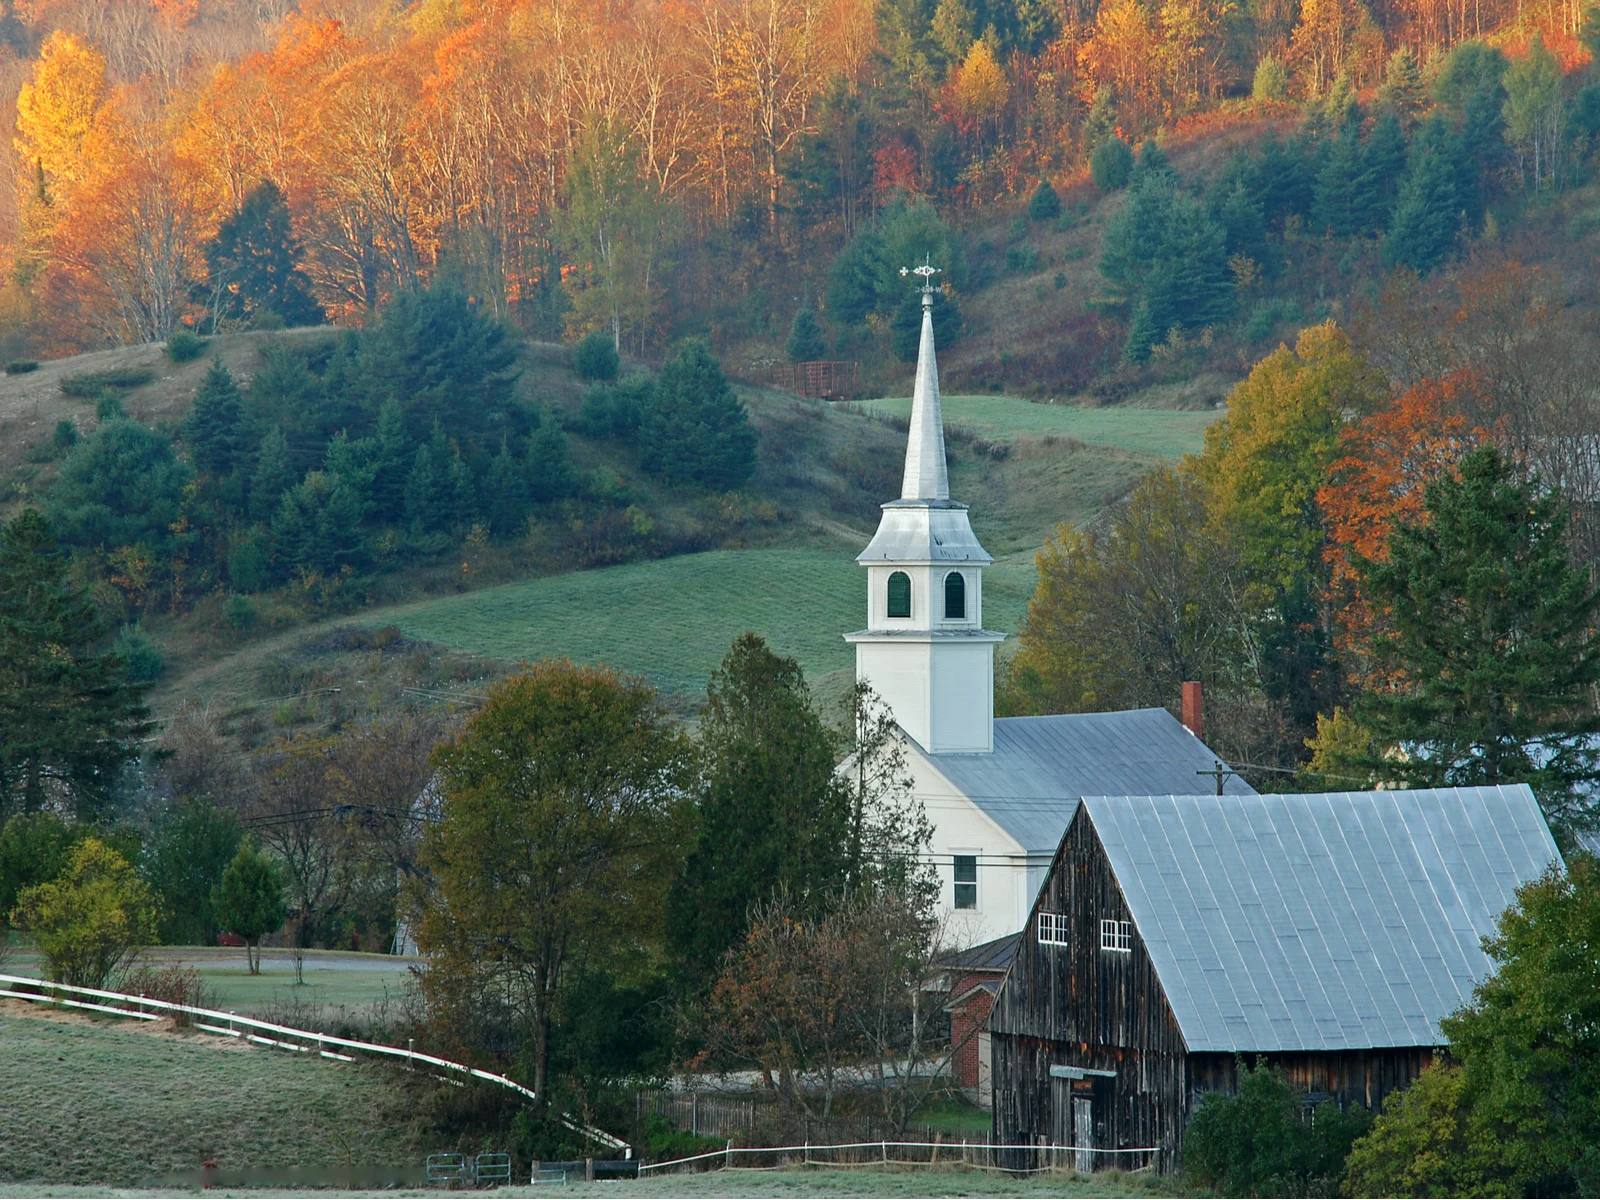 East Corinth, one of the best attractions in Vermont, and also the filming location of Beetlejuice, pictured at sunrise with sweeping hills in the background